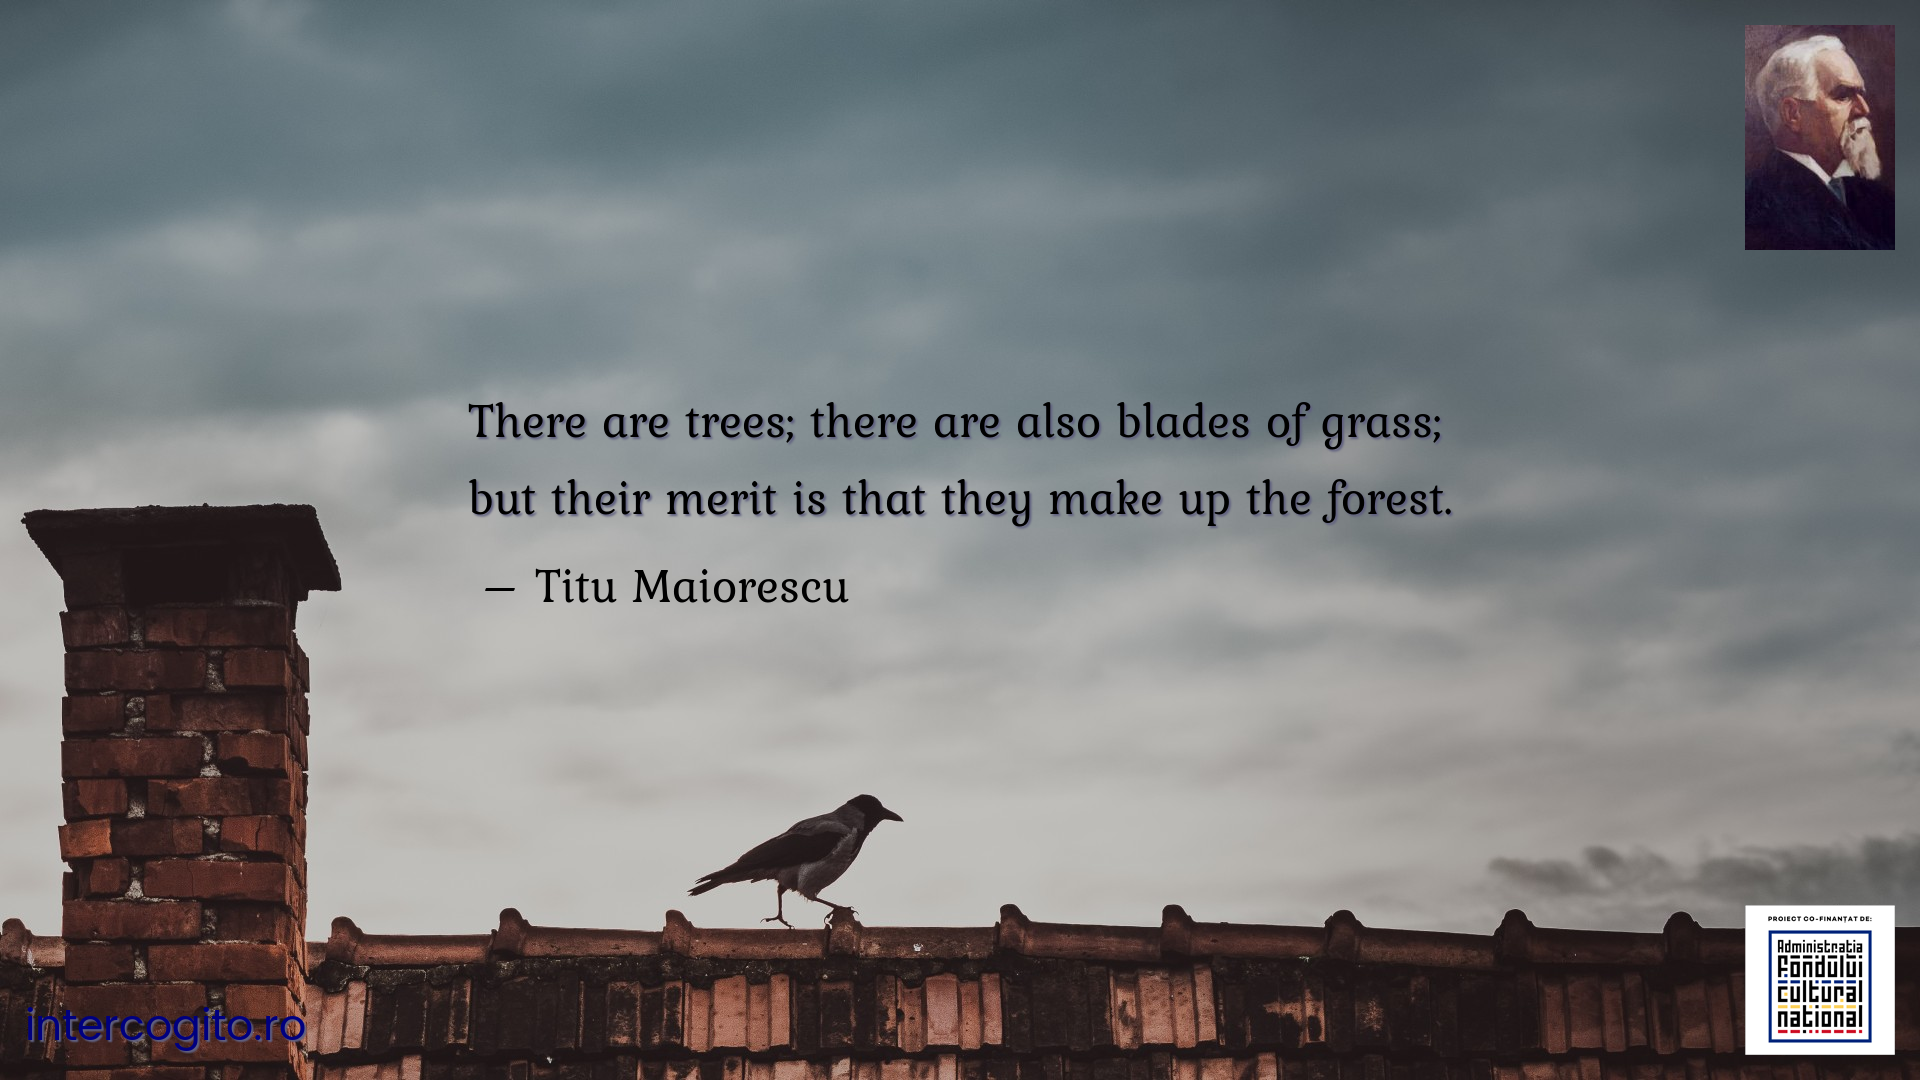 There are trees; there are also blades of grass; but their merit is that they make up the forest.